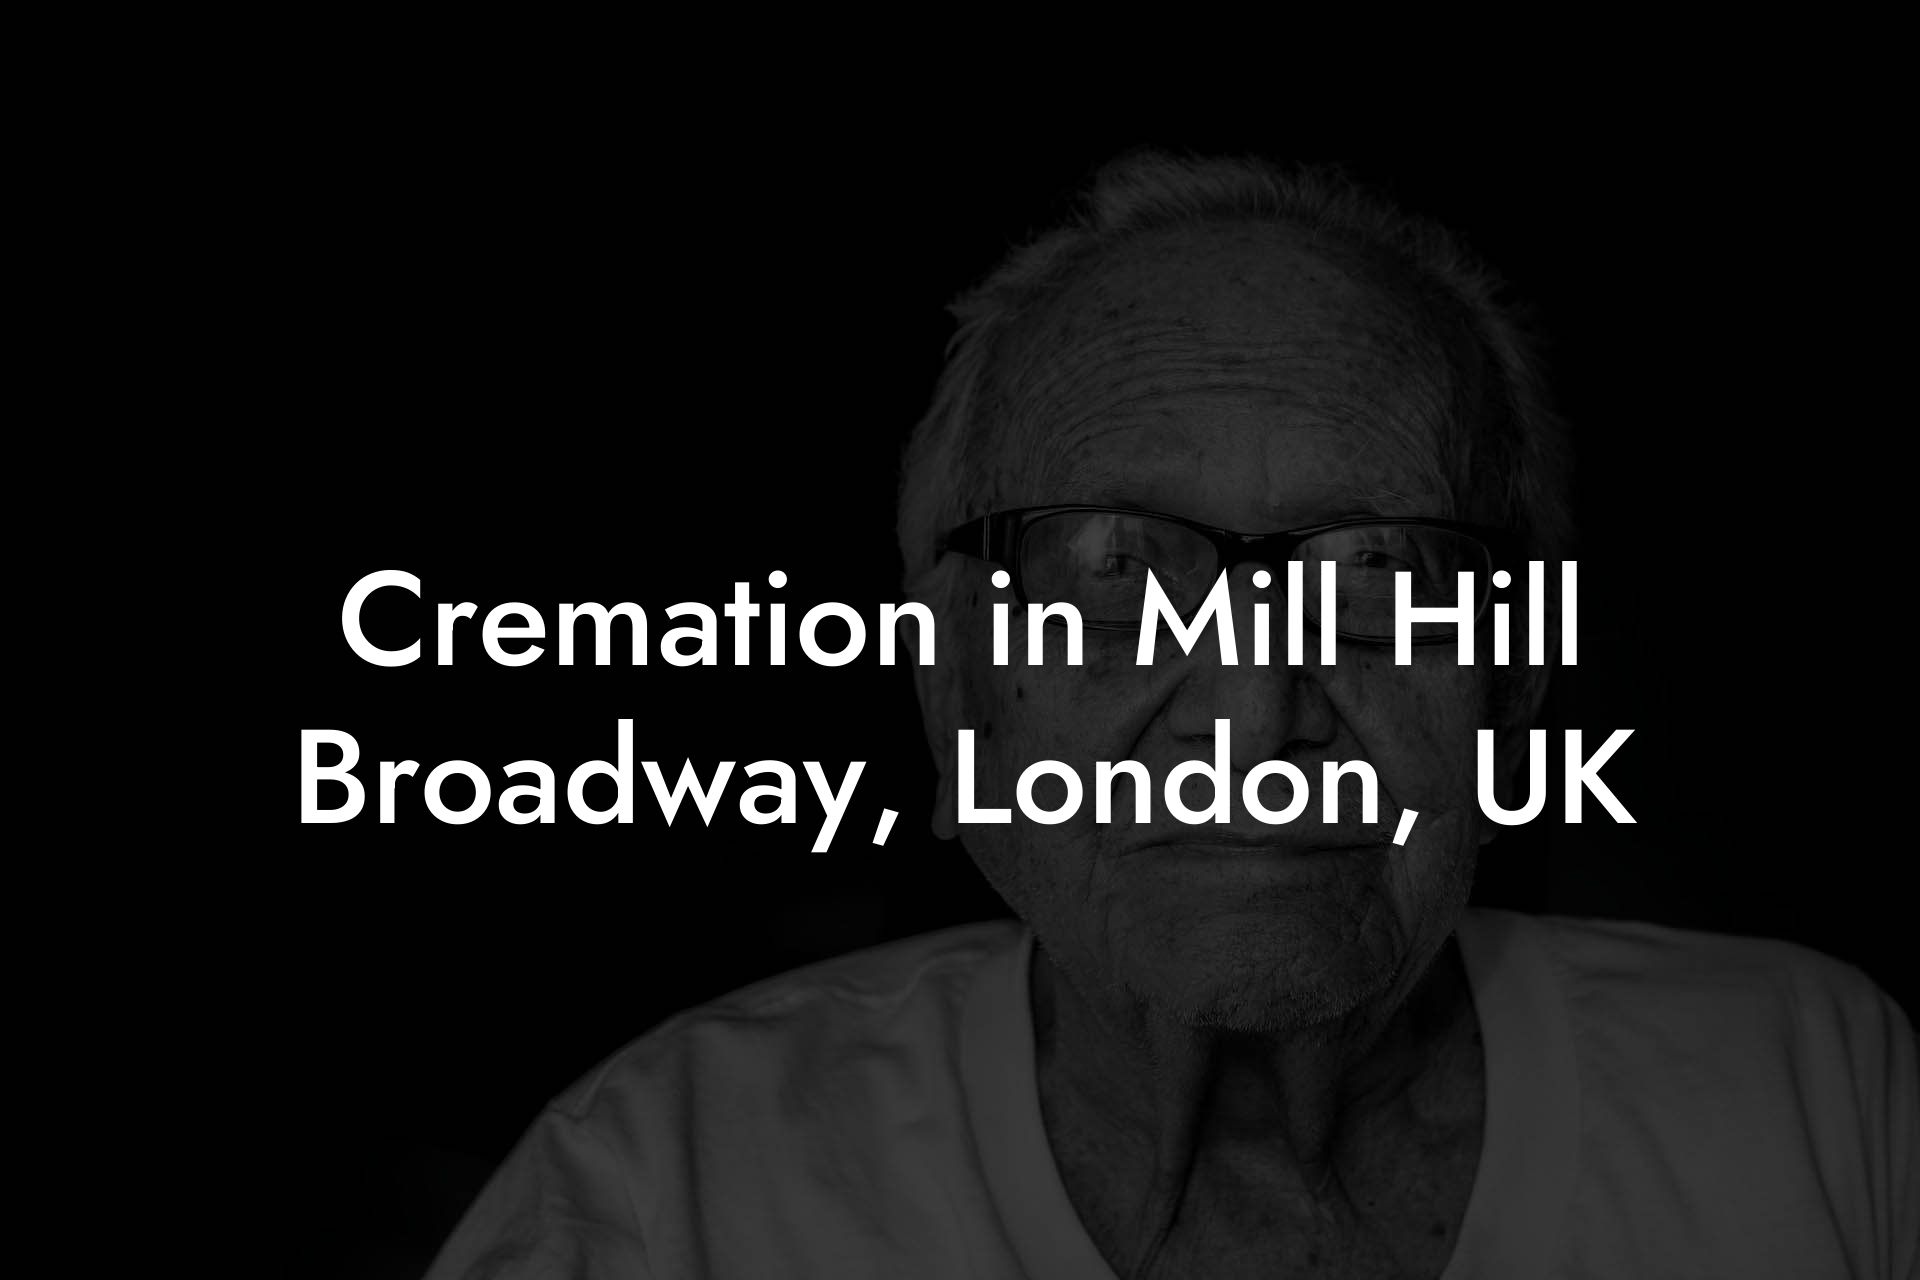 Cremation in Mill Hill Broadway, London, UK